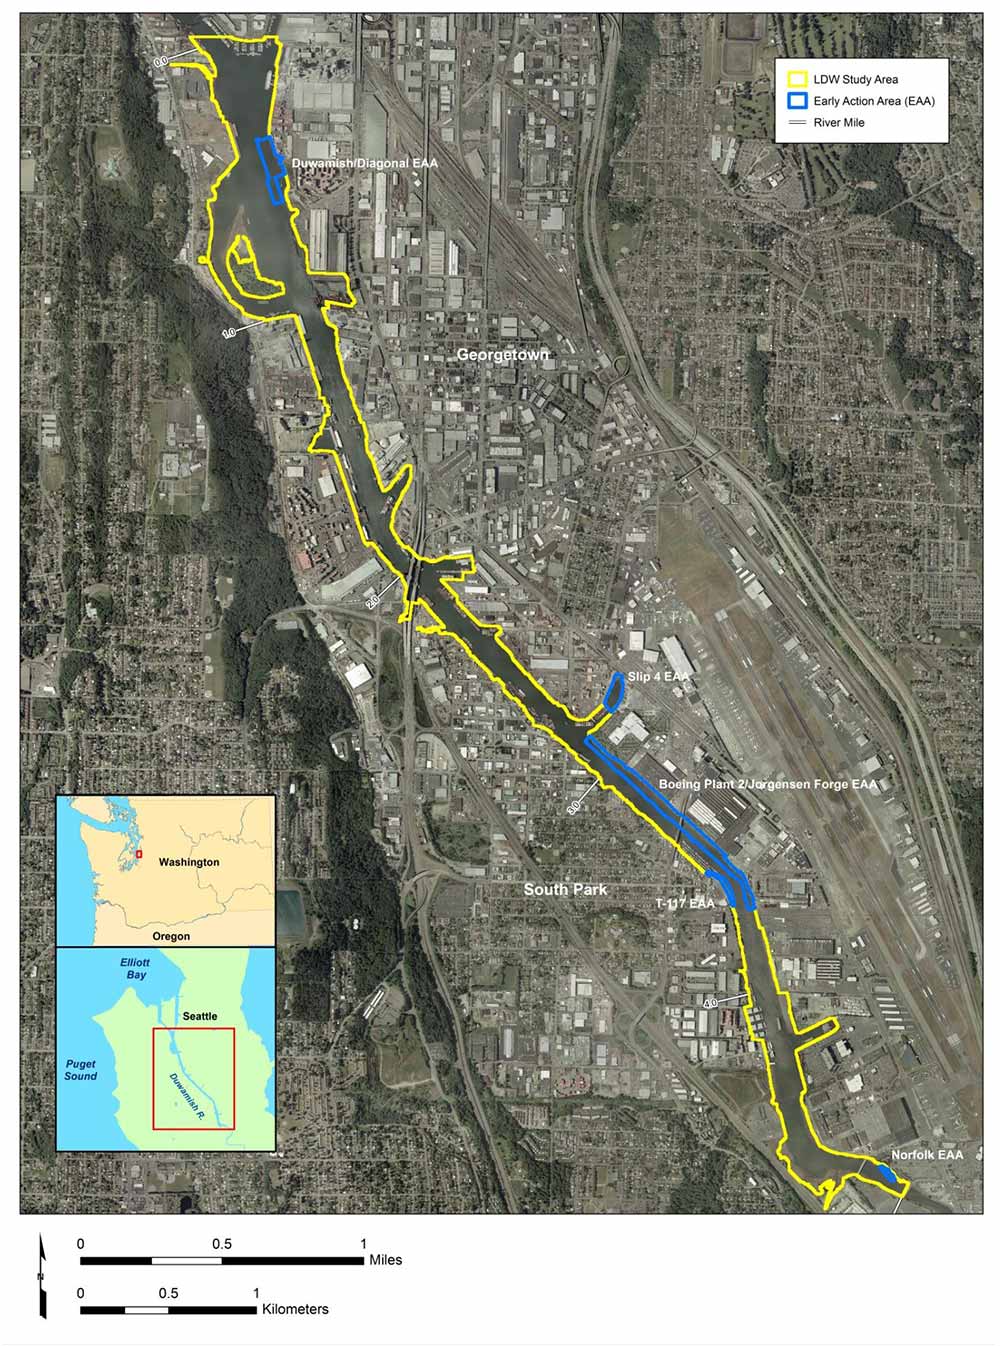 map of lower Duwamish Waterway with Superfund study area highlighted in yellow